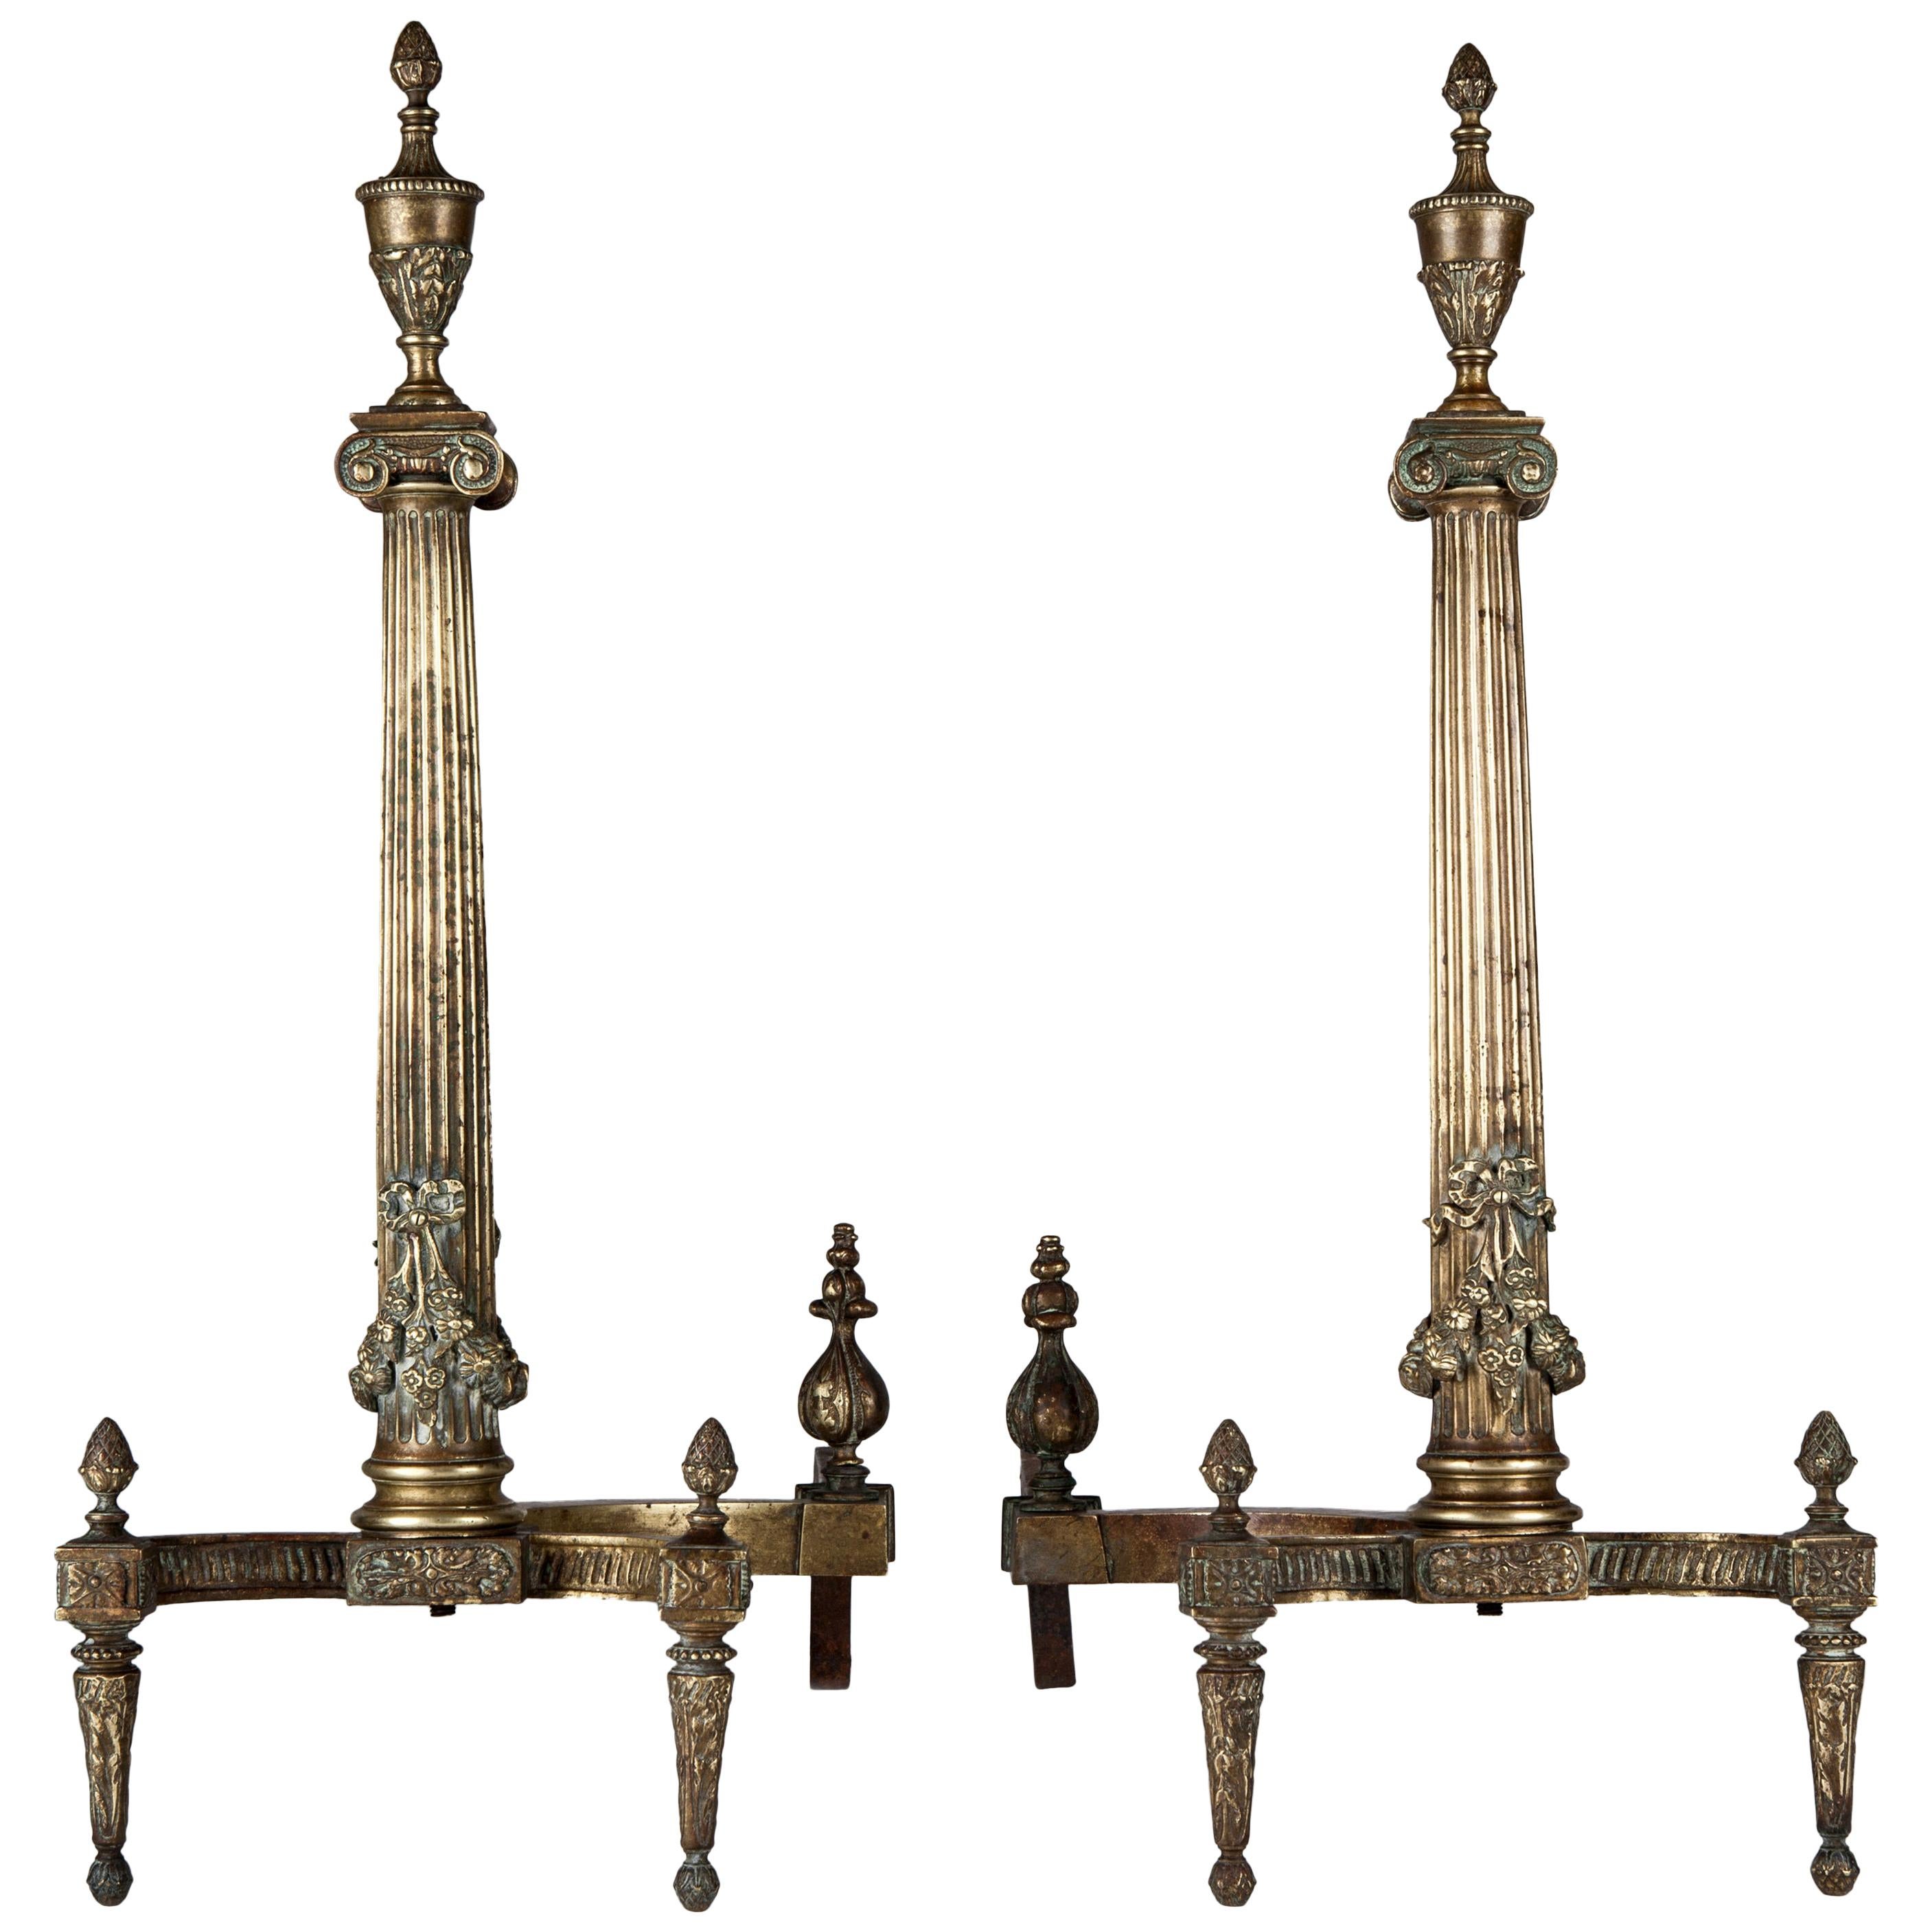 Antique Neoclassical Cast Brass Andirons with Tapered Fluted Columns, Circa 1900